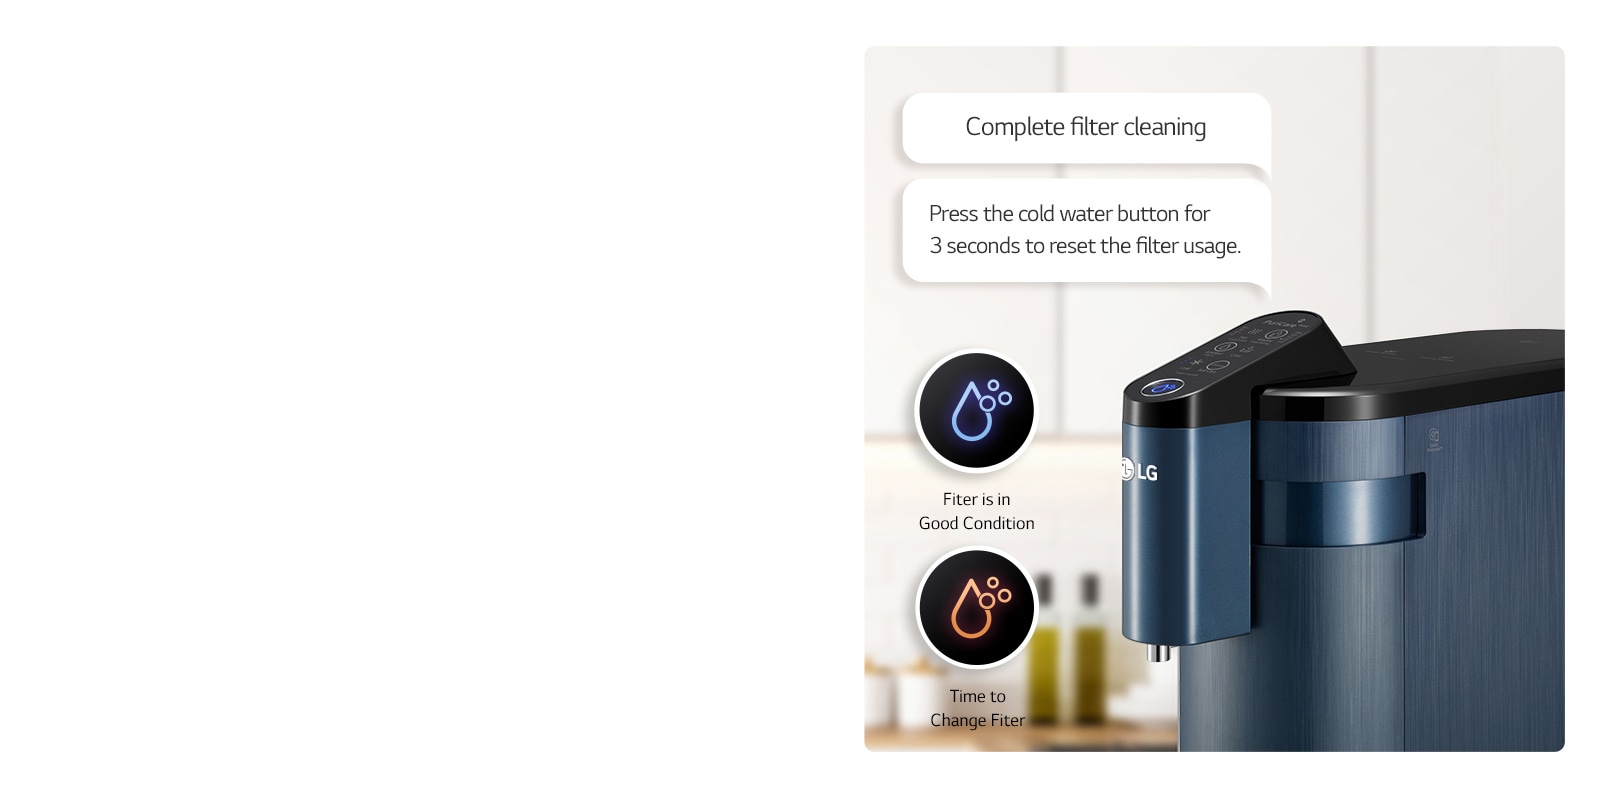 There is a water purifier in what is seen as a kitchen, a cold water hot water icon on the left, and a speech bubble